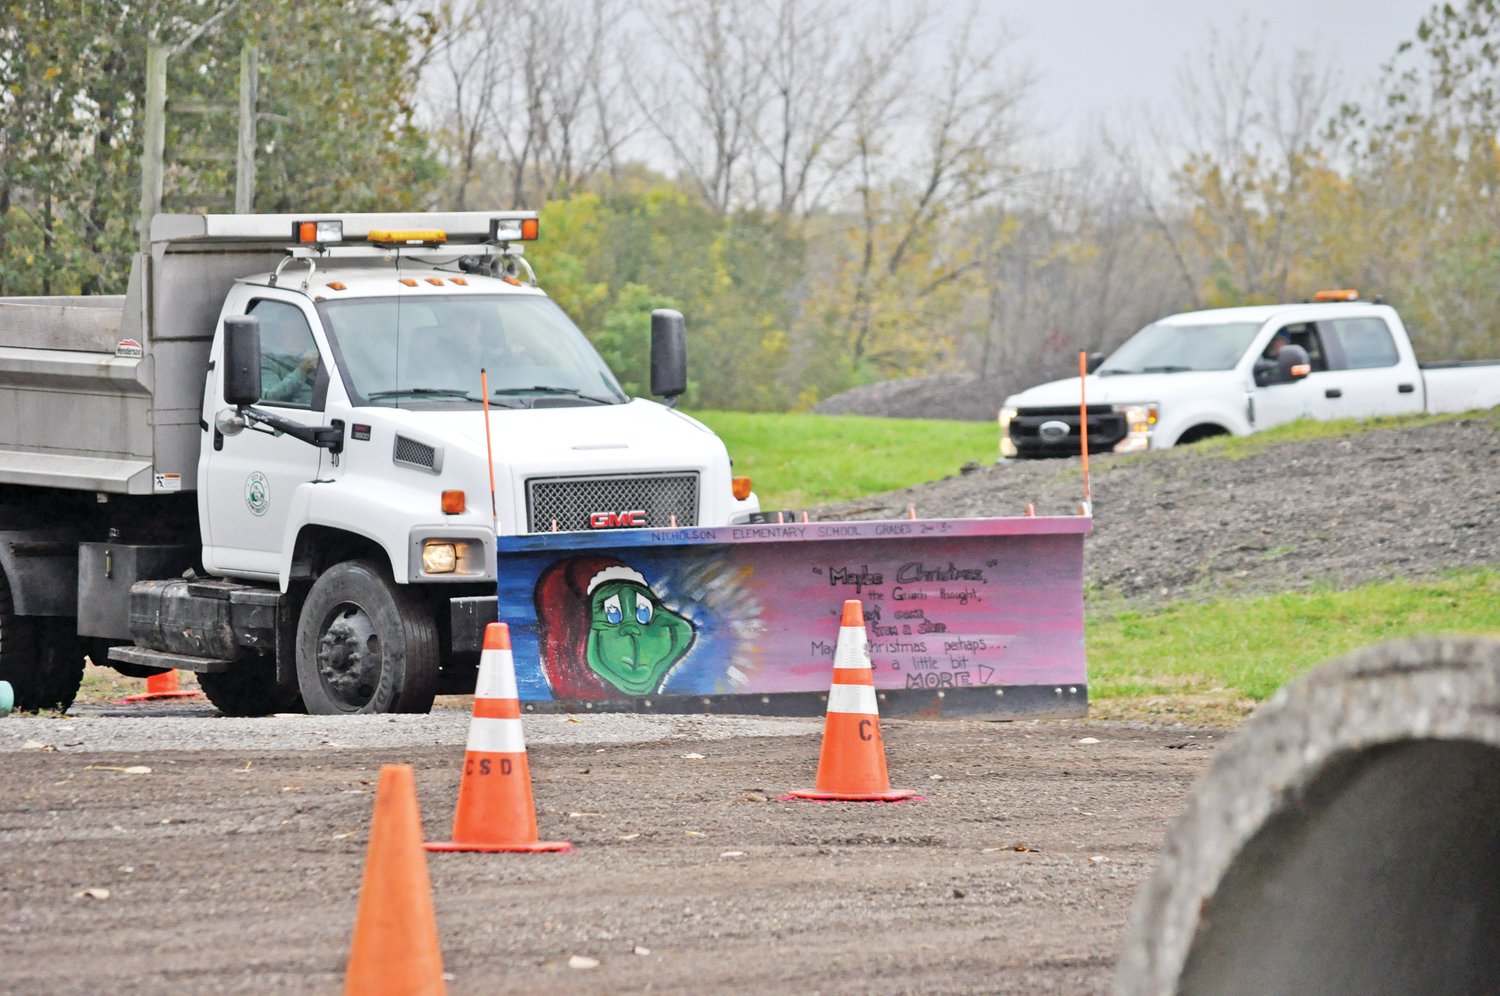 A snow plow driven by Chad Hodges maneuvers the course at the Crawfordsville Street Department’s Snow Plow Roadeo on Thursday at the Rodney L. Jenkins Memorial Yard Waste Site. The event trains drivers for plowing city streets.